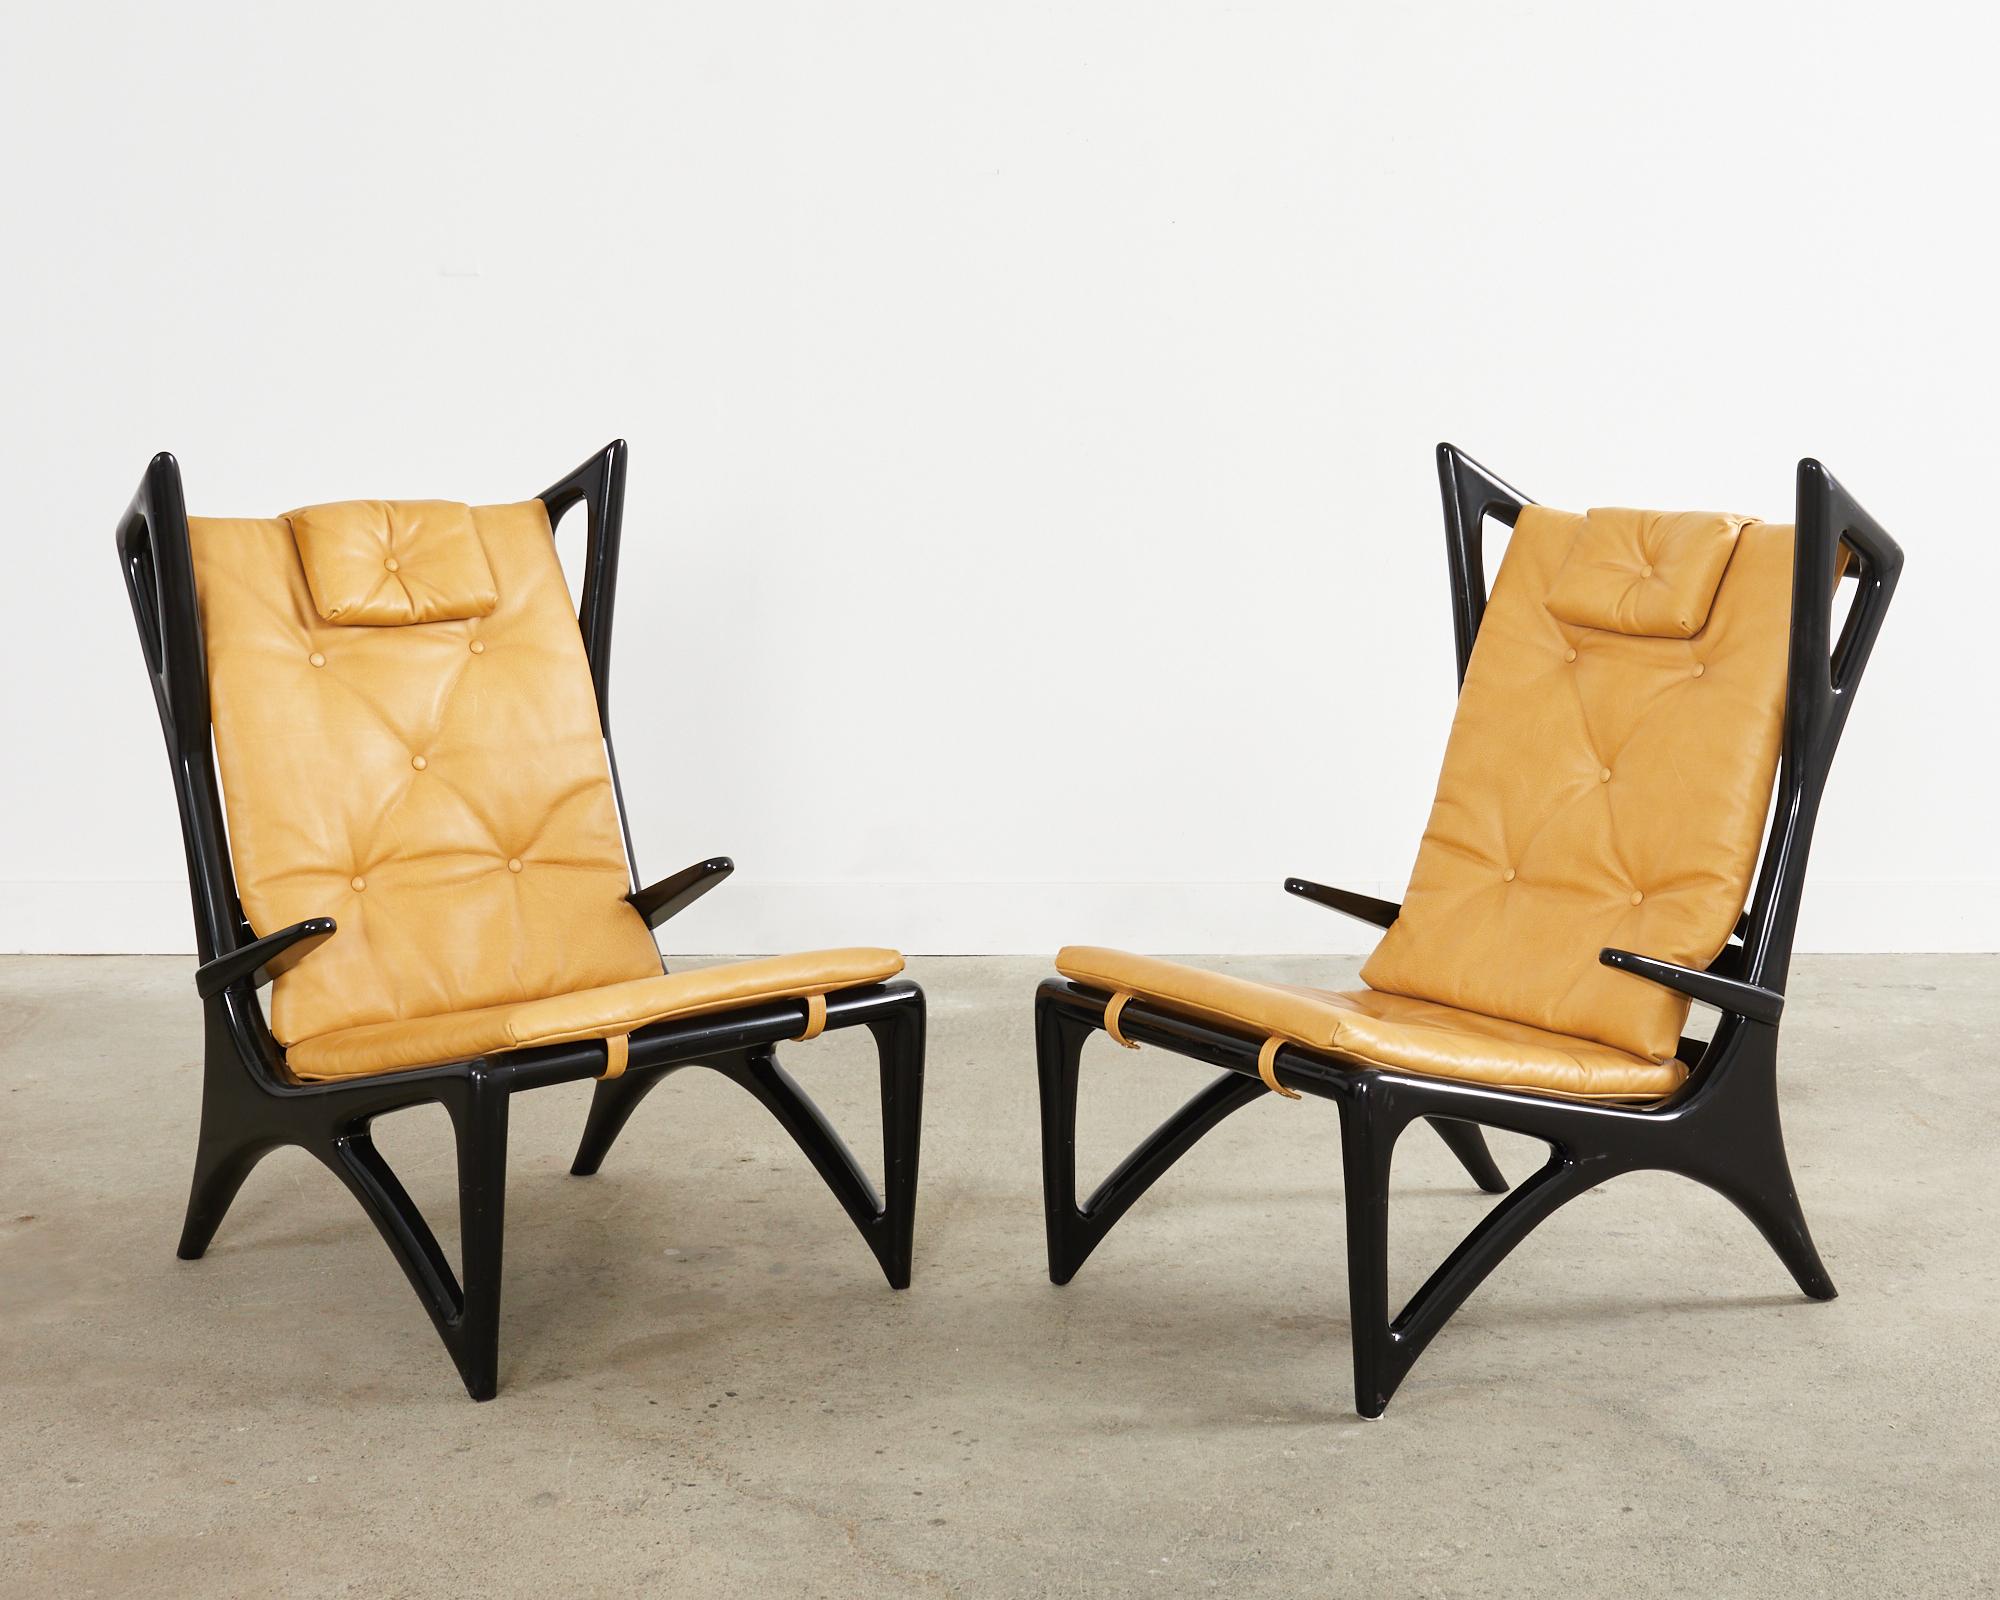 Pair of Italian Gio Ponti Style Ebonized Lounge Chairs In Good Condition For Sale In Rio Vista, CA